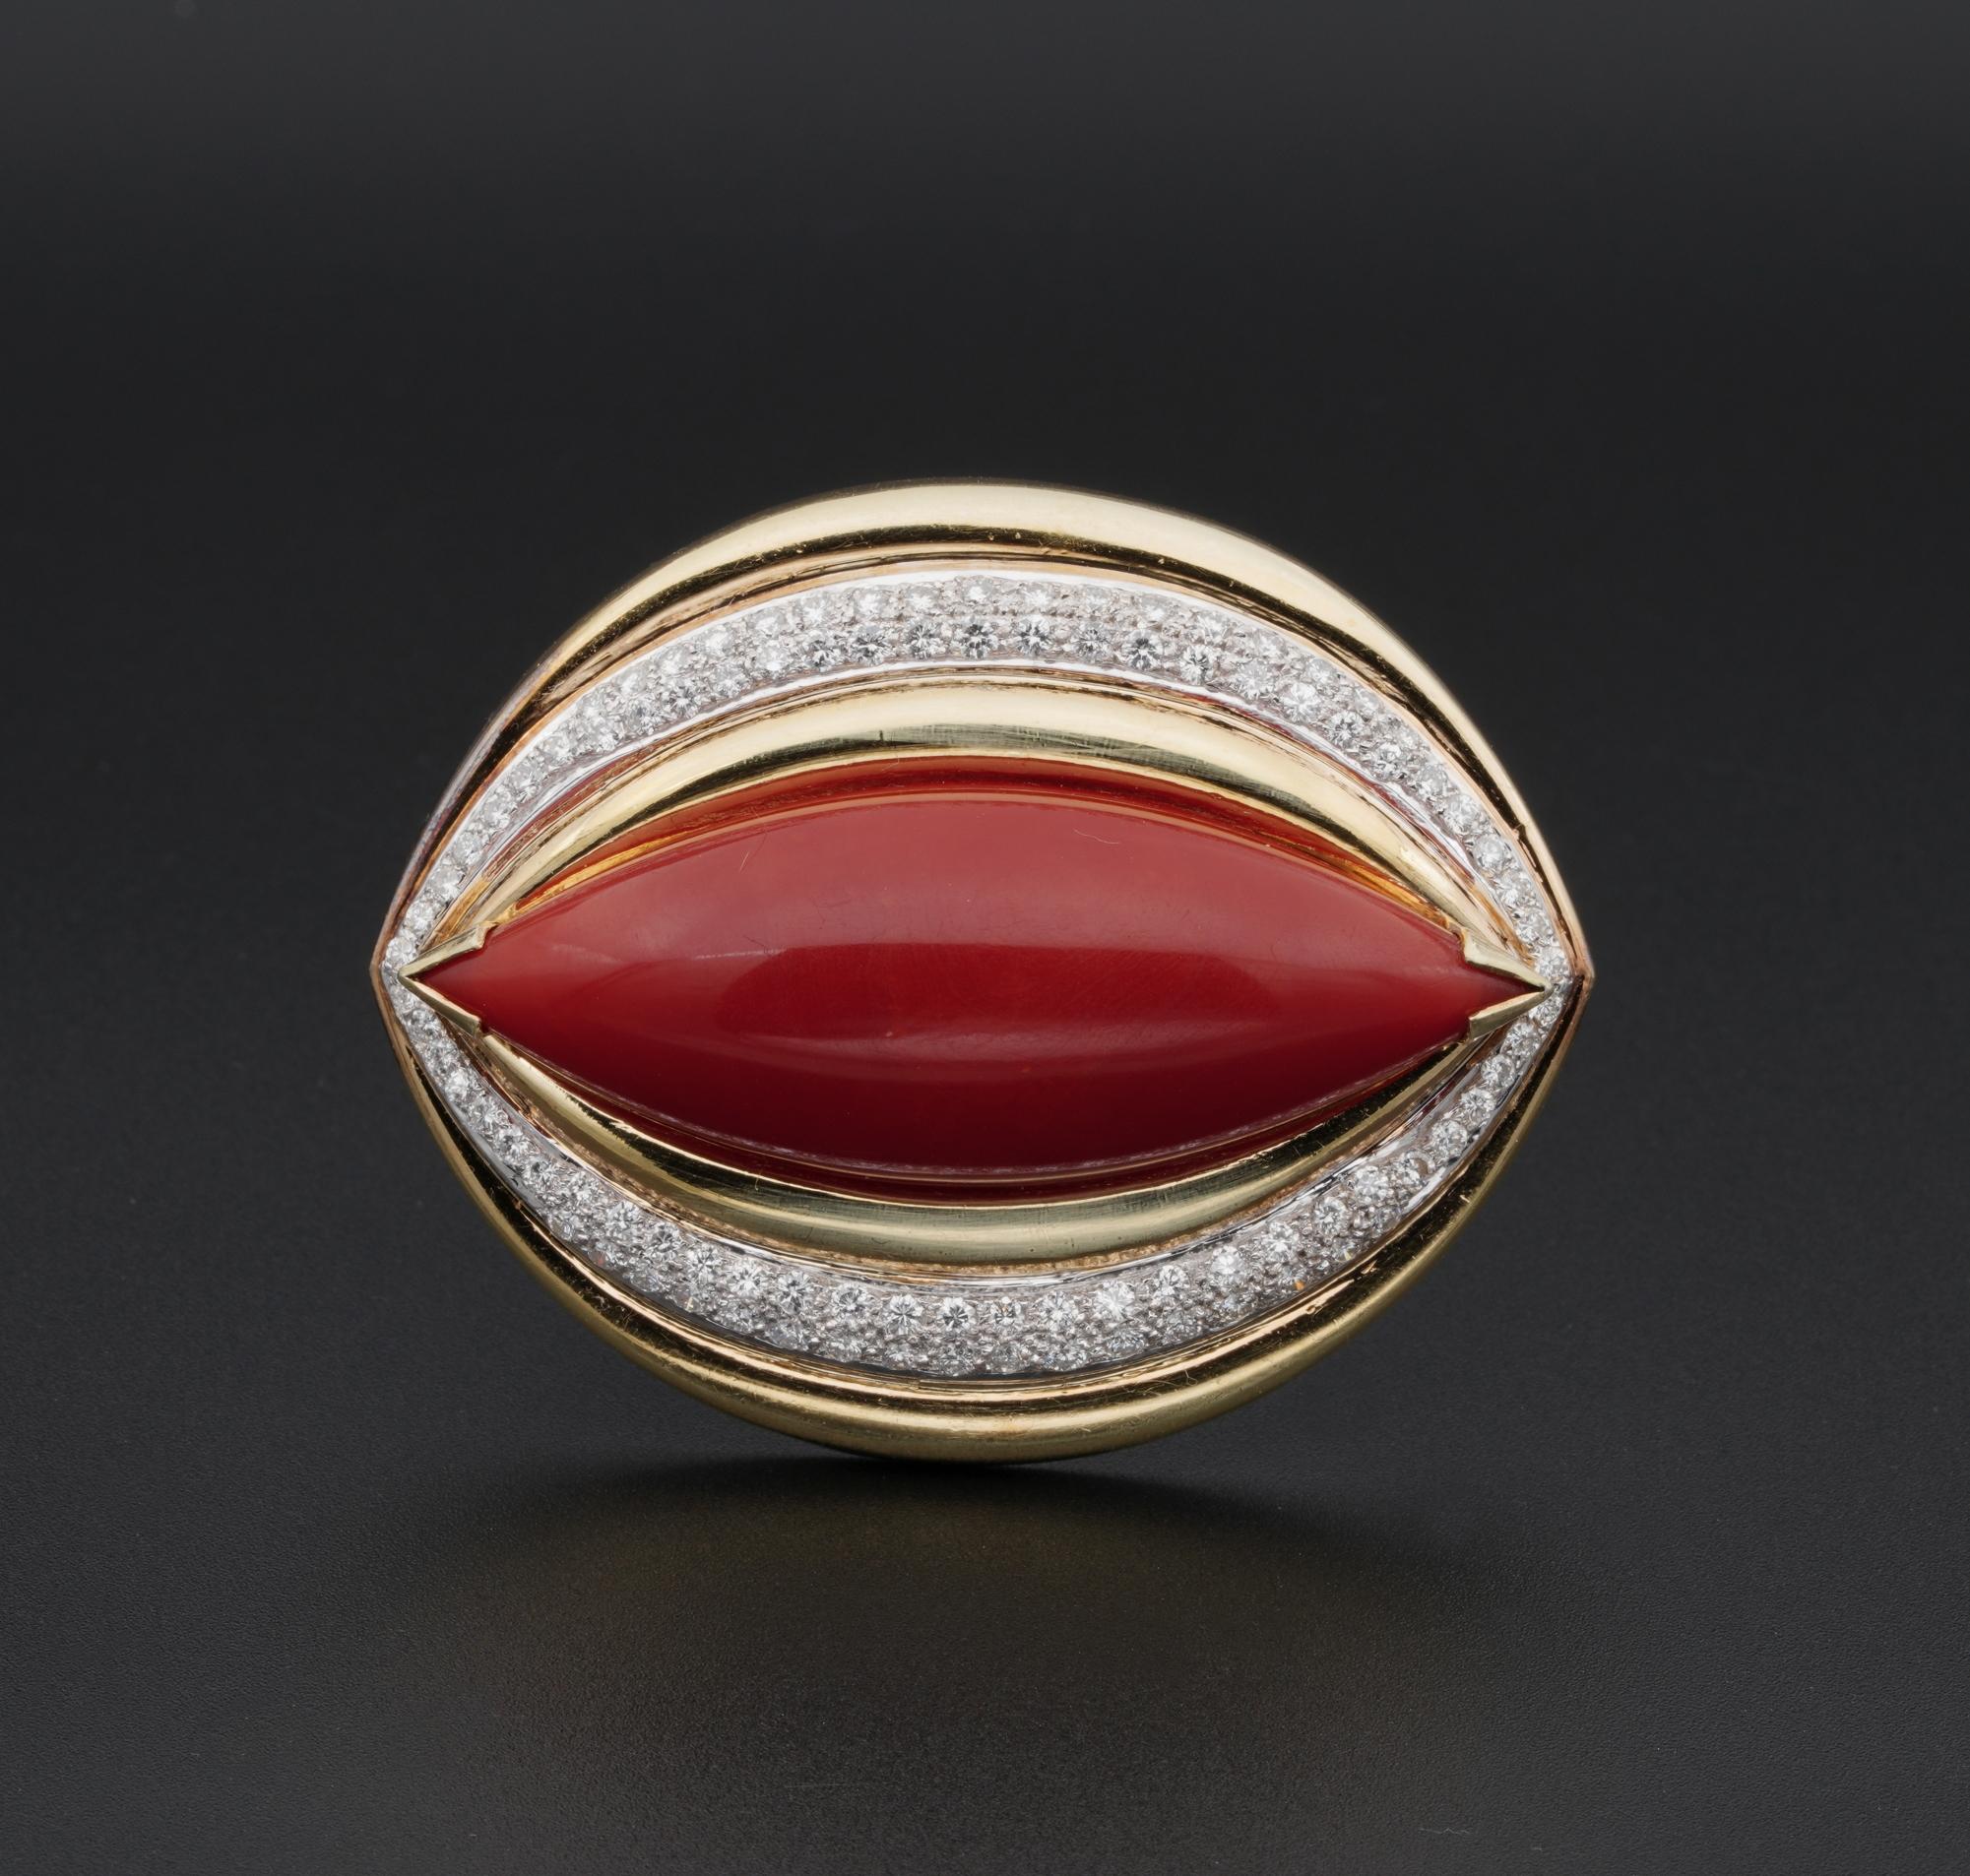 Distinctive High End Jewellery

An unique mid century Pop Art brooch pendant , art expression of the 60's
Large sized, distinctive in design, beautifully hand created as unique piece of solid 18 KT gold
Set with a large intense deep OX Blood Red